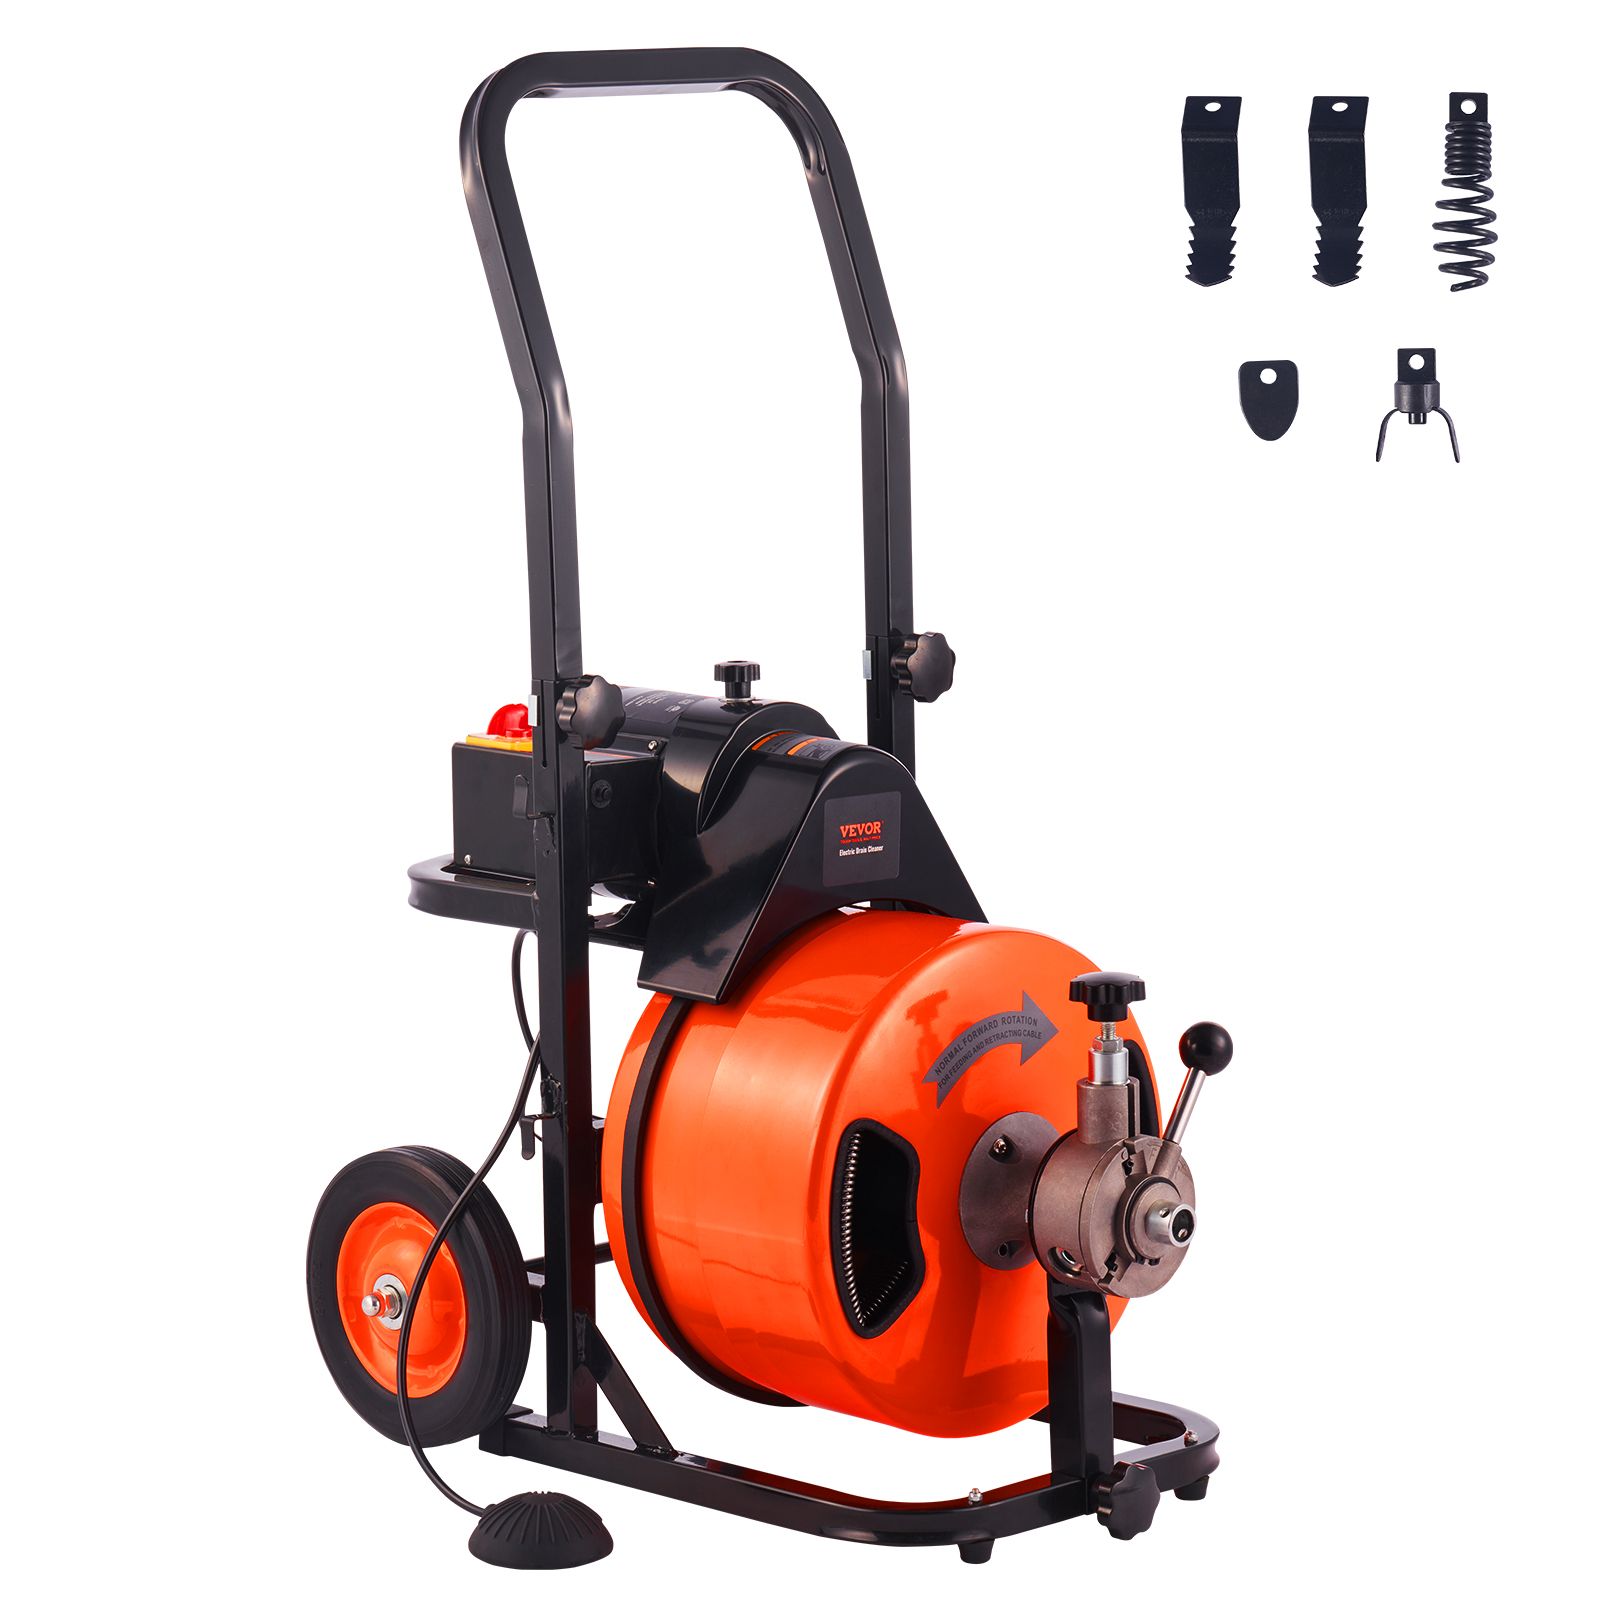 Drain Cleaner Machine,100 FT x 1/2 In,with 4 Cutters